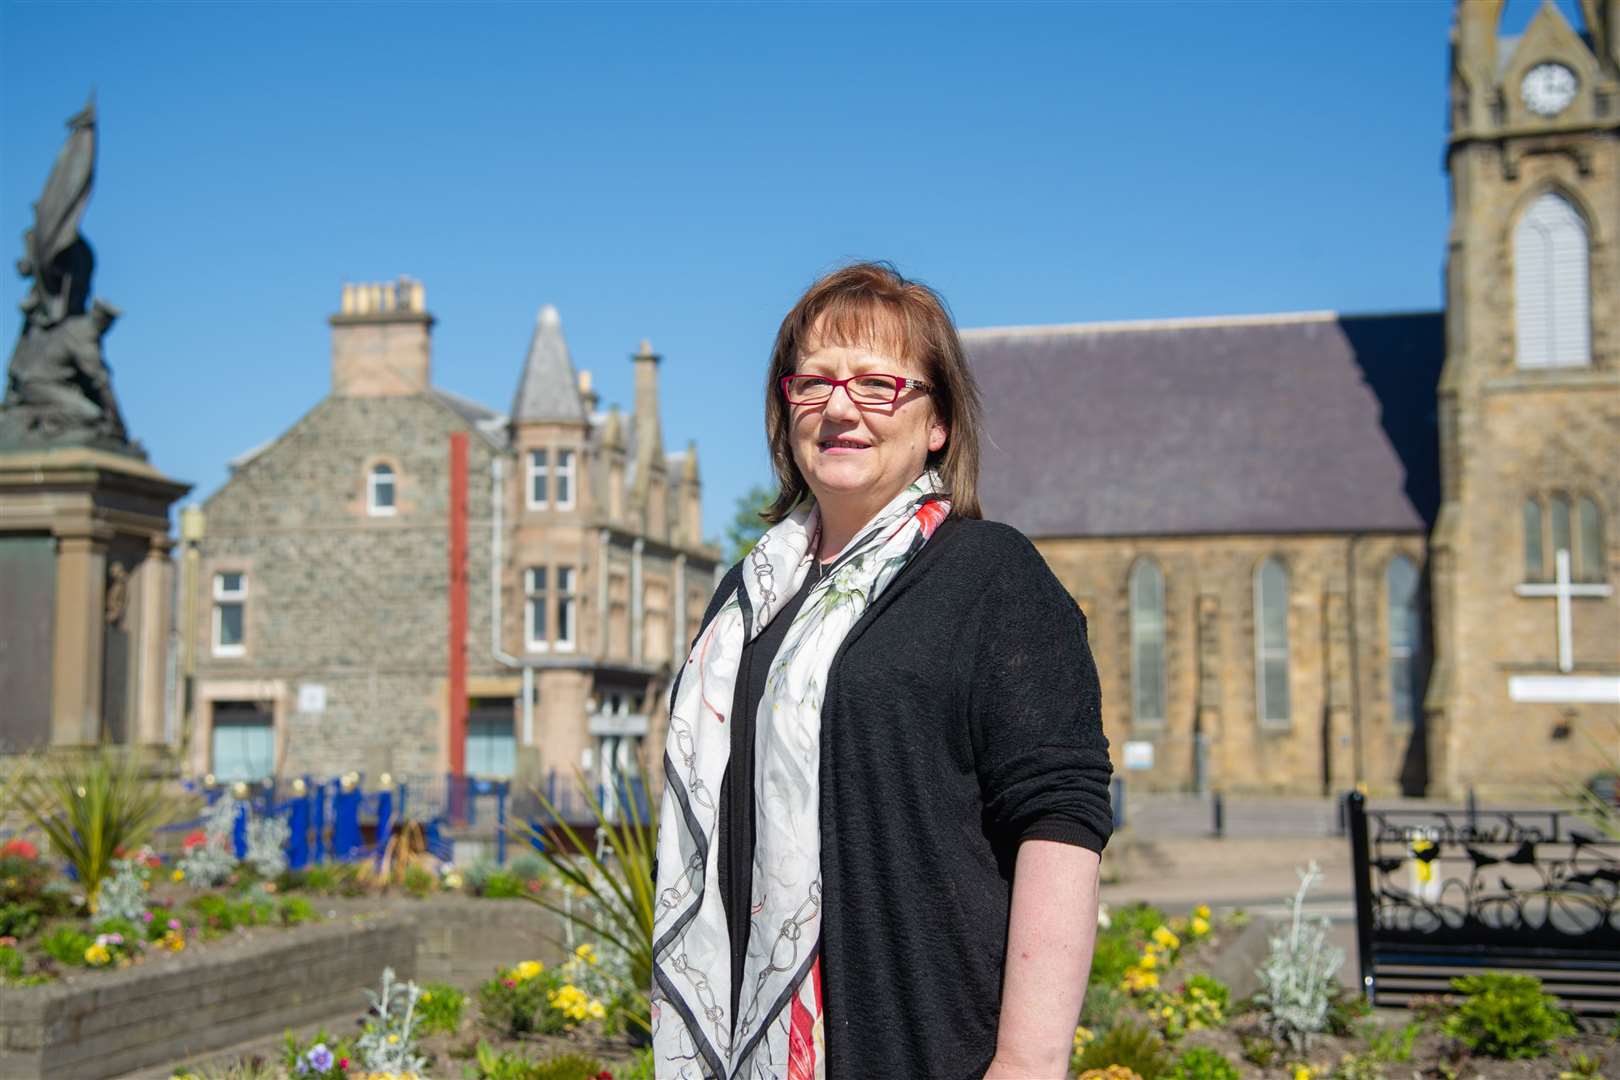 SNP candidate and sitting Buckie councillor Sonya Warren. Picture: Daniel Forsyth